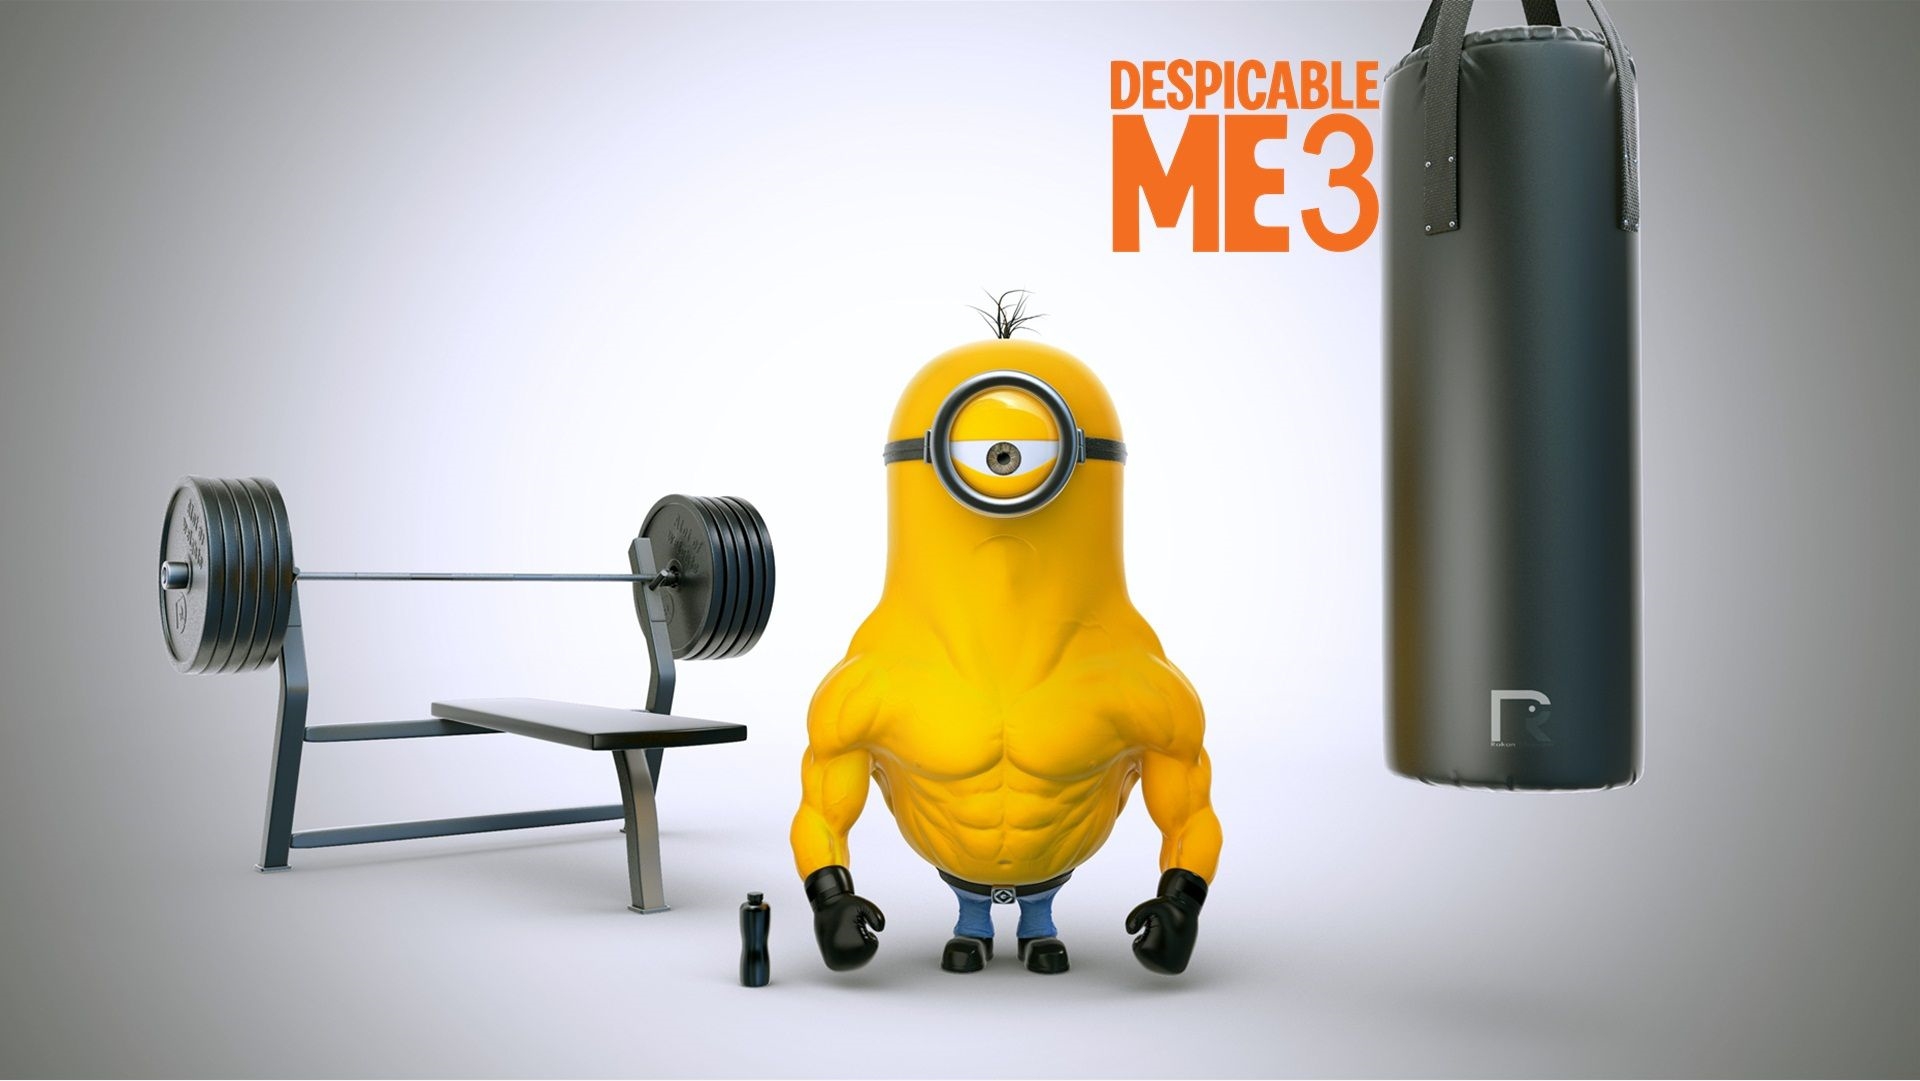 Despicable-Me-3-Funny-Wallpapers.jpg